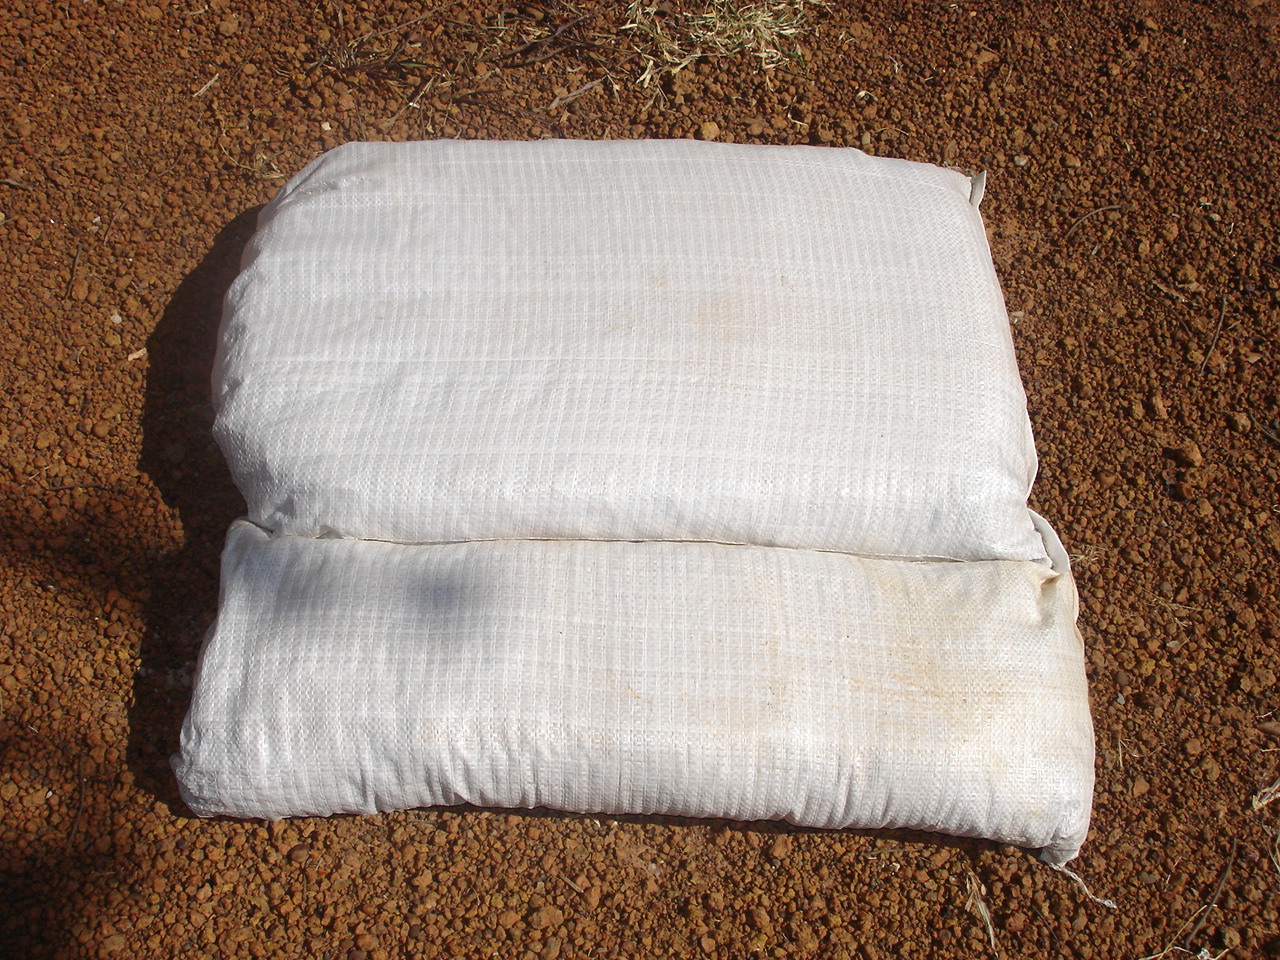 Insulation-filled tube sandbags on exterior of soil-filled earthbags creates a superinsulated wall with high thermal mass.